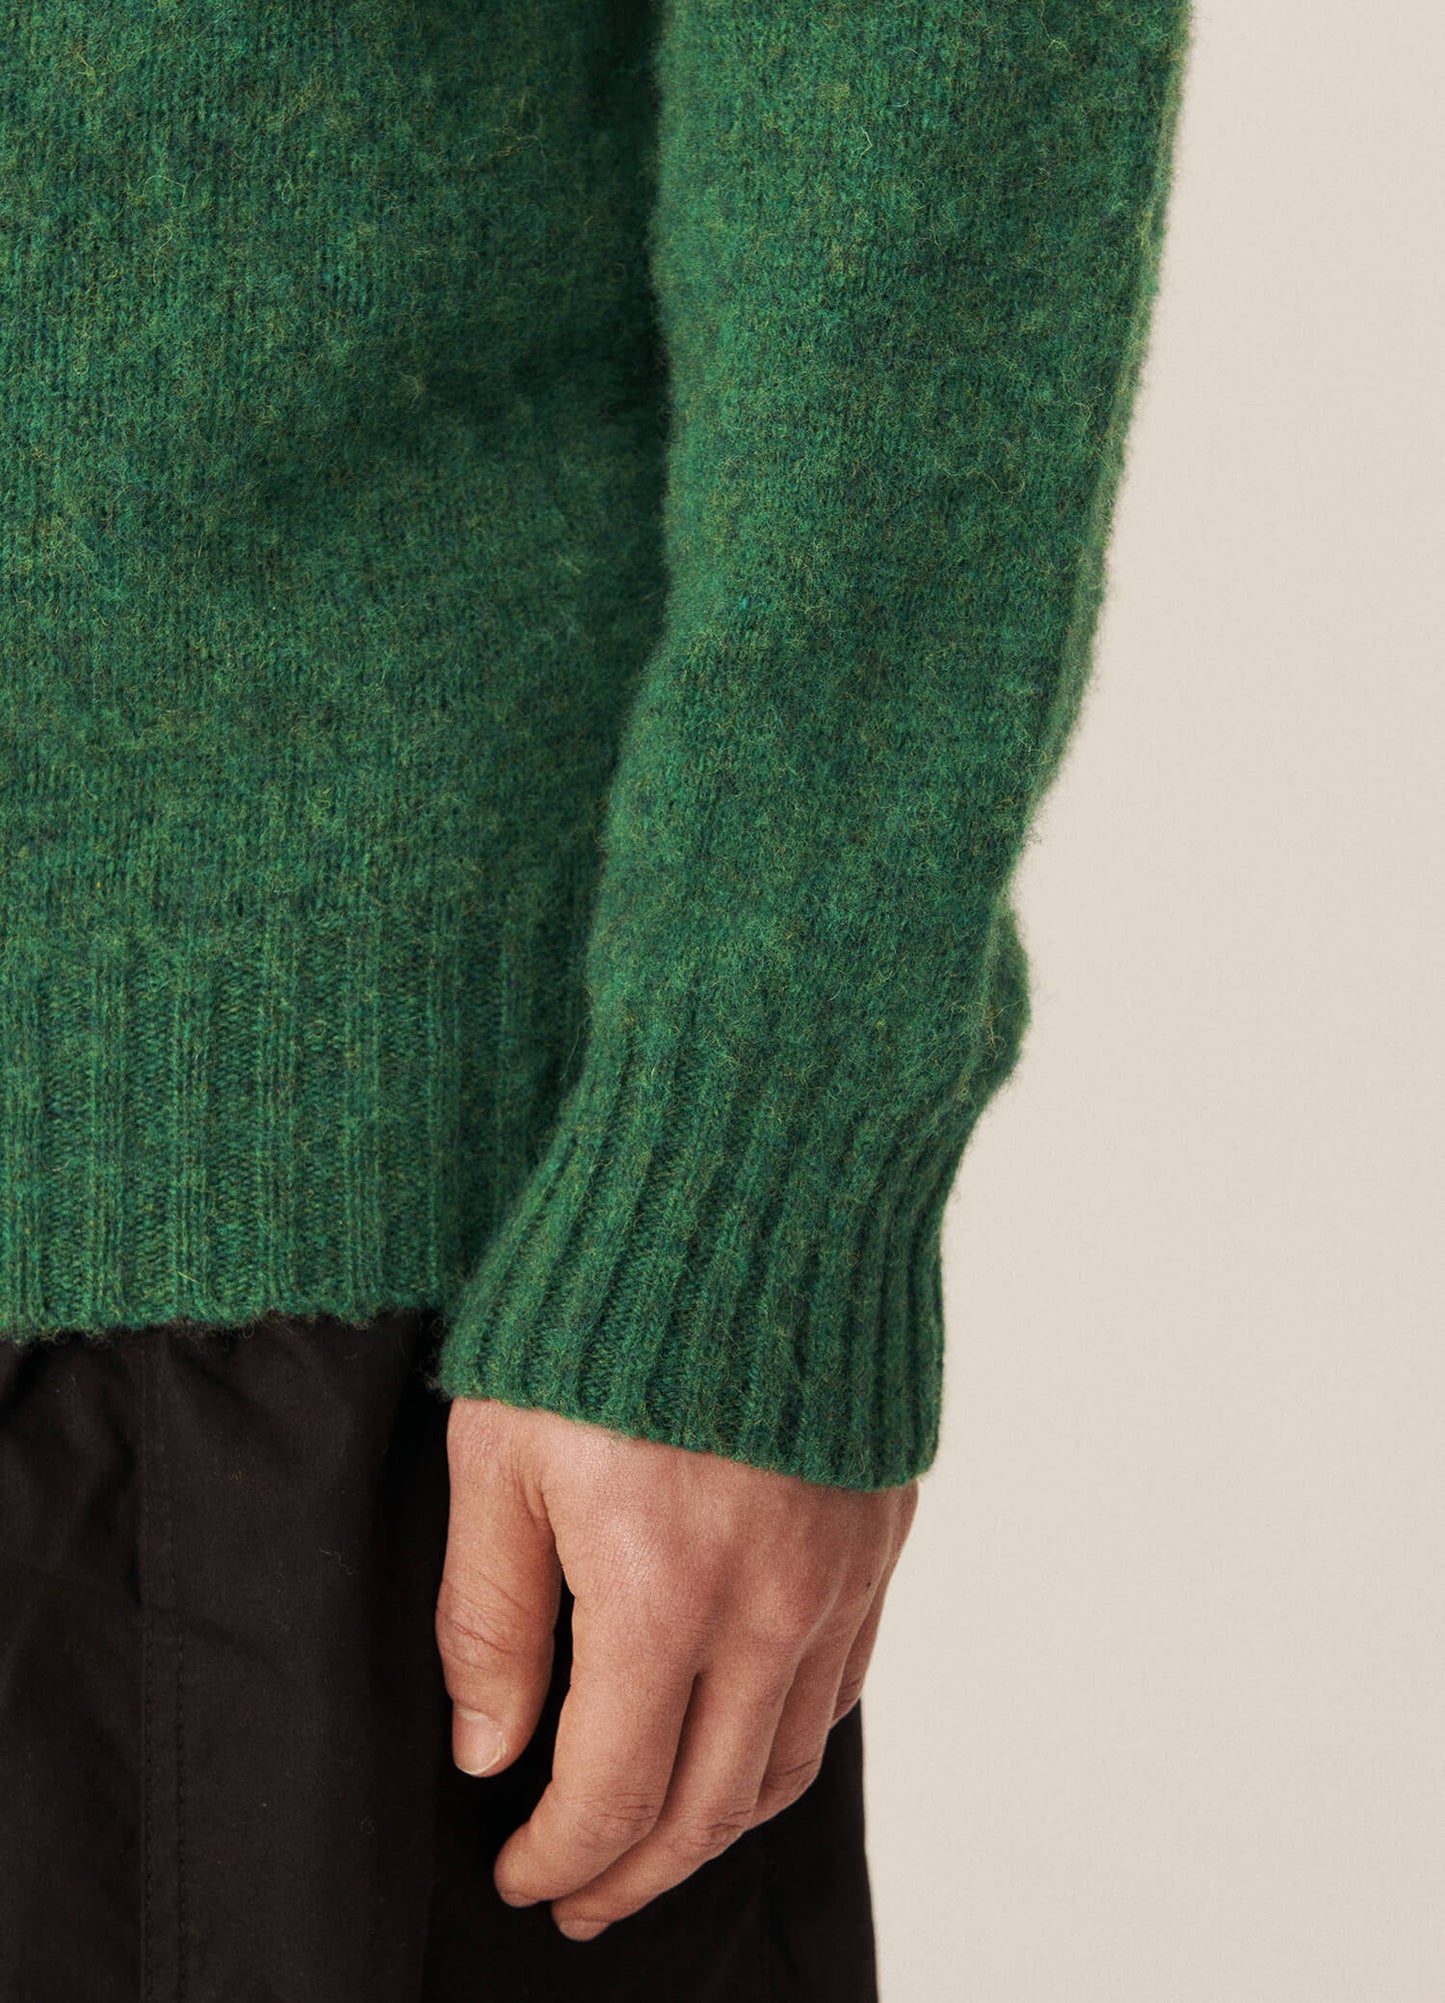 
                  
                    Suedehead Crew Neck Knit - Green
                  
                